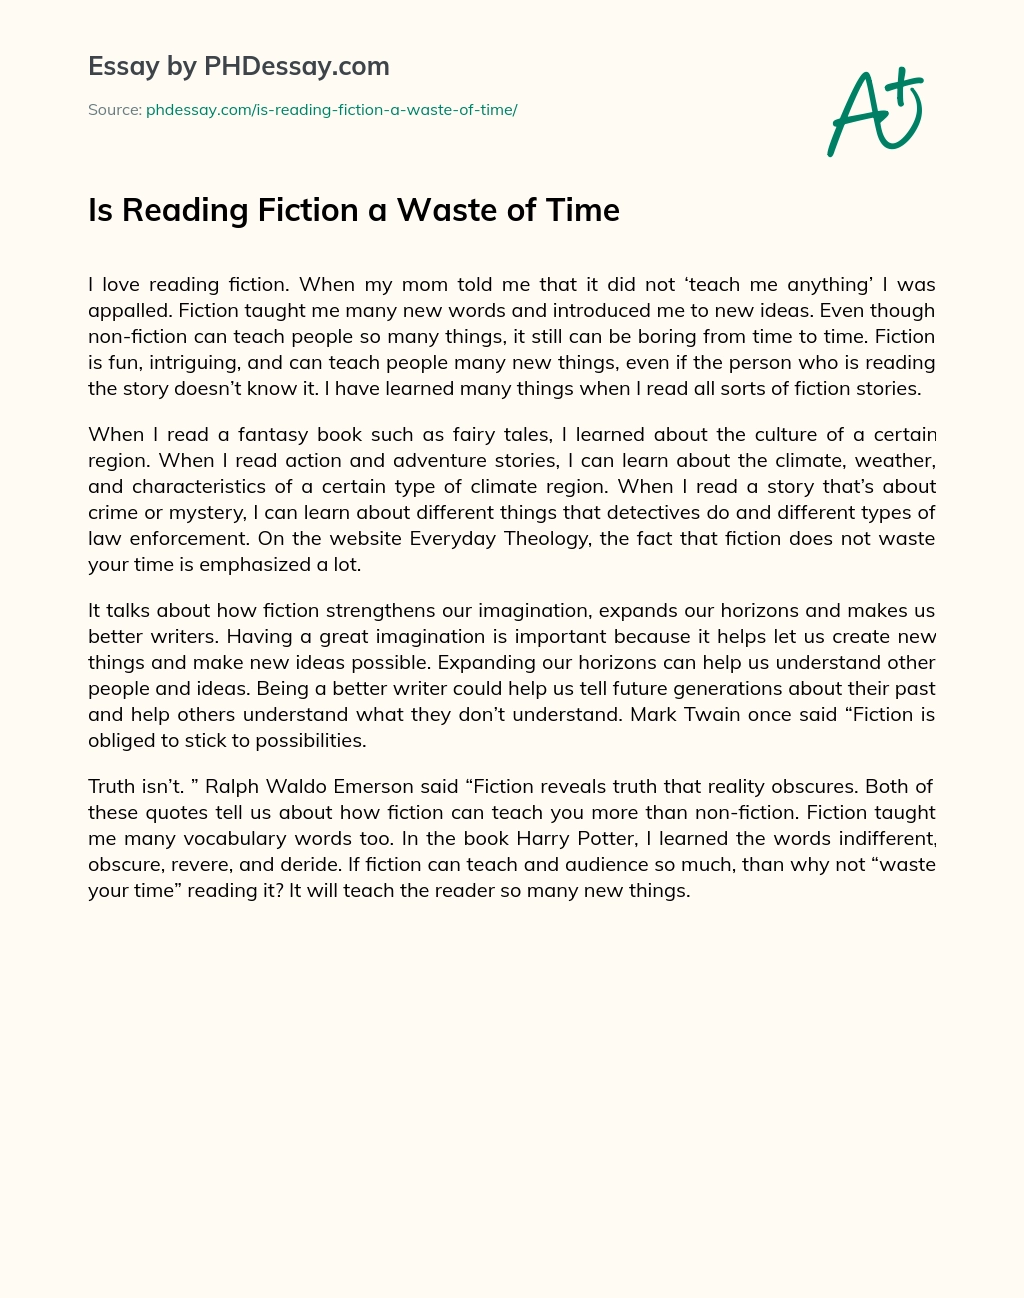 reading novels is a waste of time essay